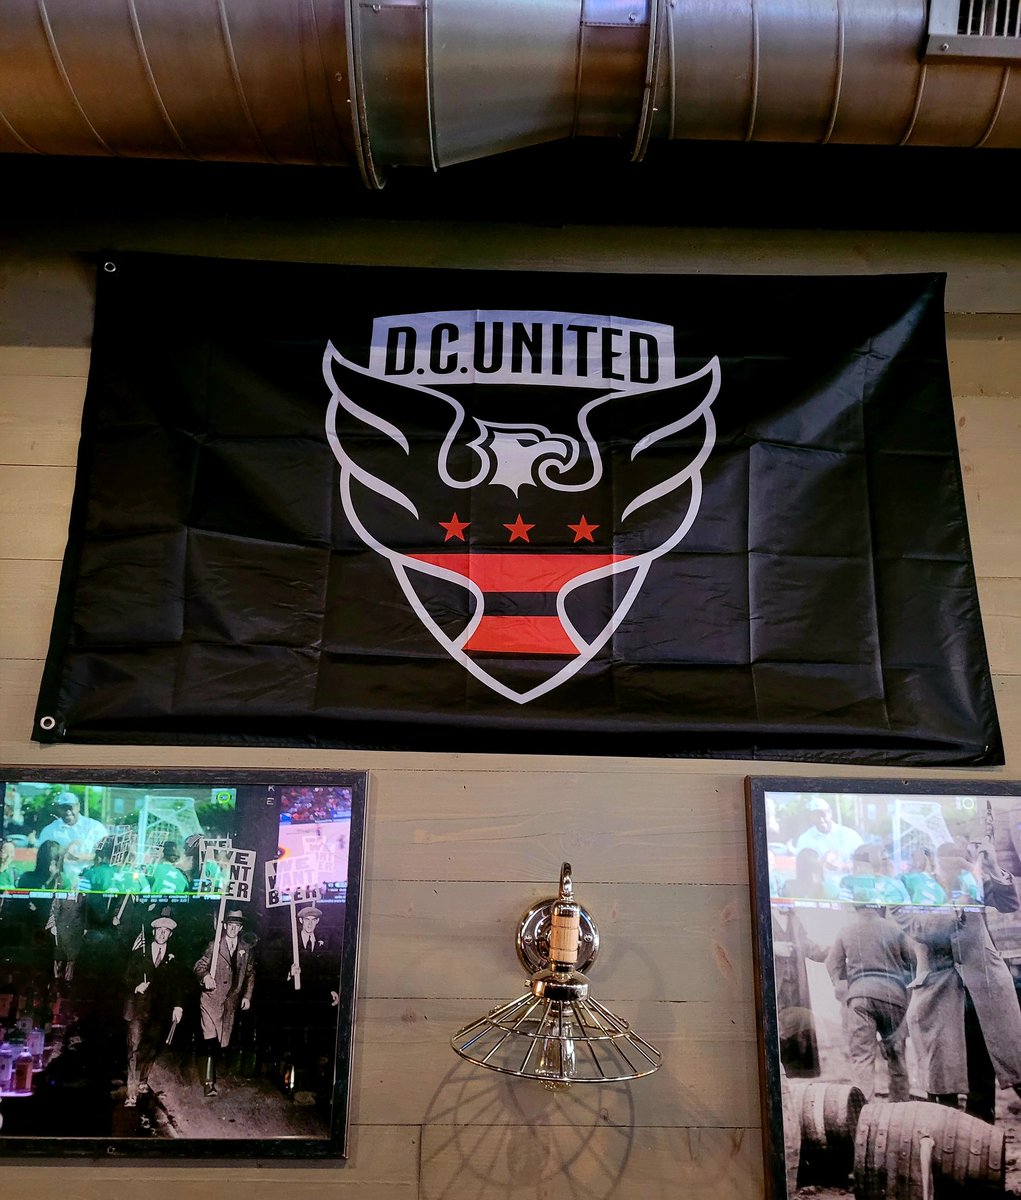 #dcunited watch party!!! $5 @Heineken_US cans during the match!!! @dcunited staff will be here to hand out some swag!!! See you soon! #dcsports #dcpatios #dcbars #soccer #football #drinkdc #eatdc